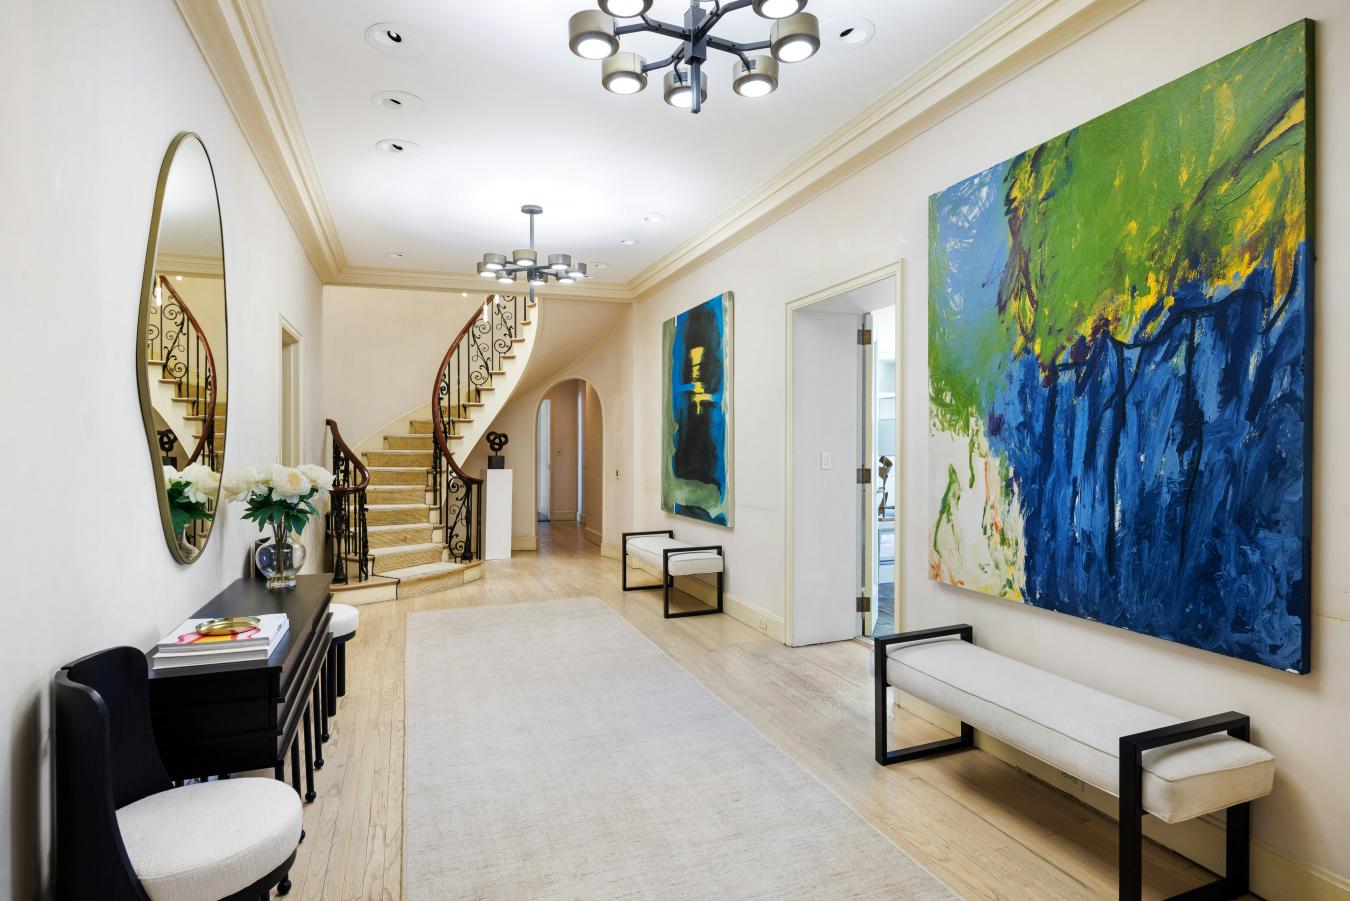 760 PARK AVENUE, New York, New York, 10021, United States, 9 Bedrooms Bedrooms, ,7 BathroomsBathrooms,Residential,For Sale,760 PARK AVENUE,1468583